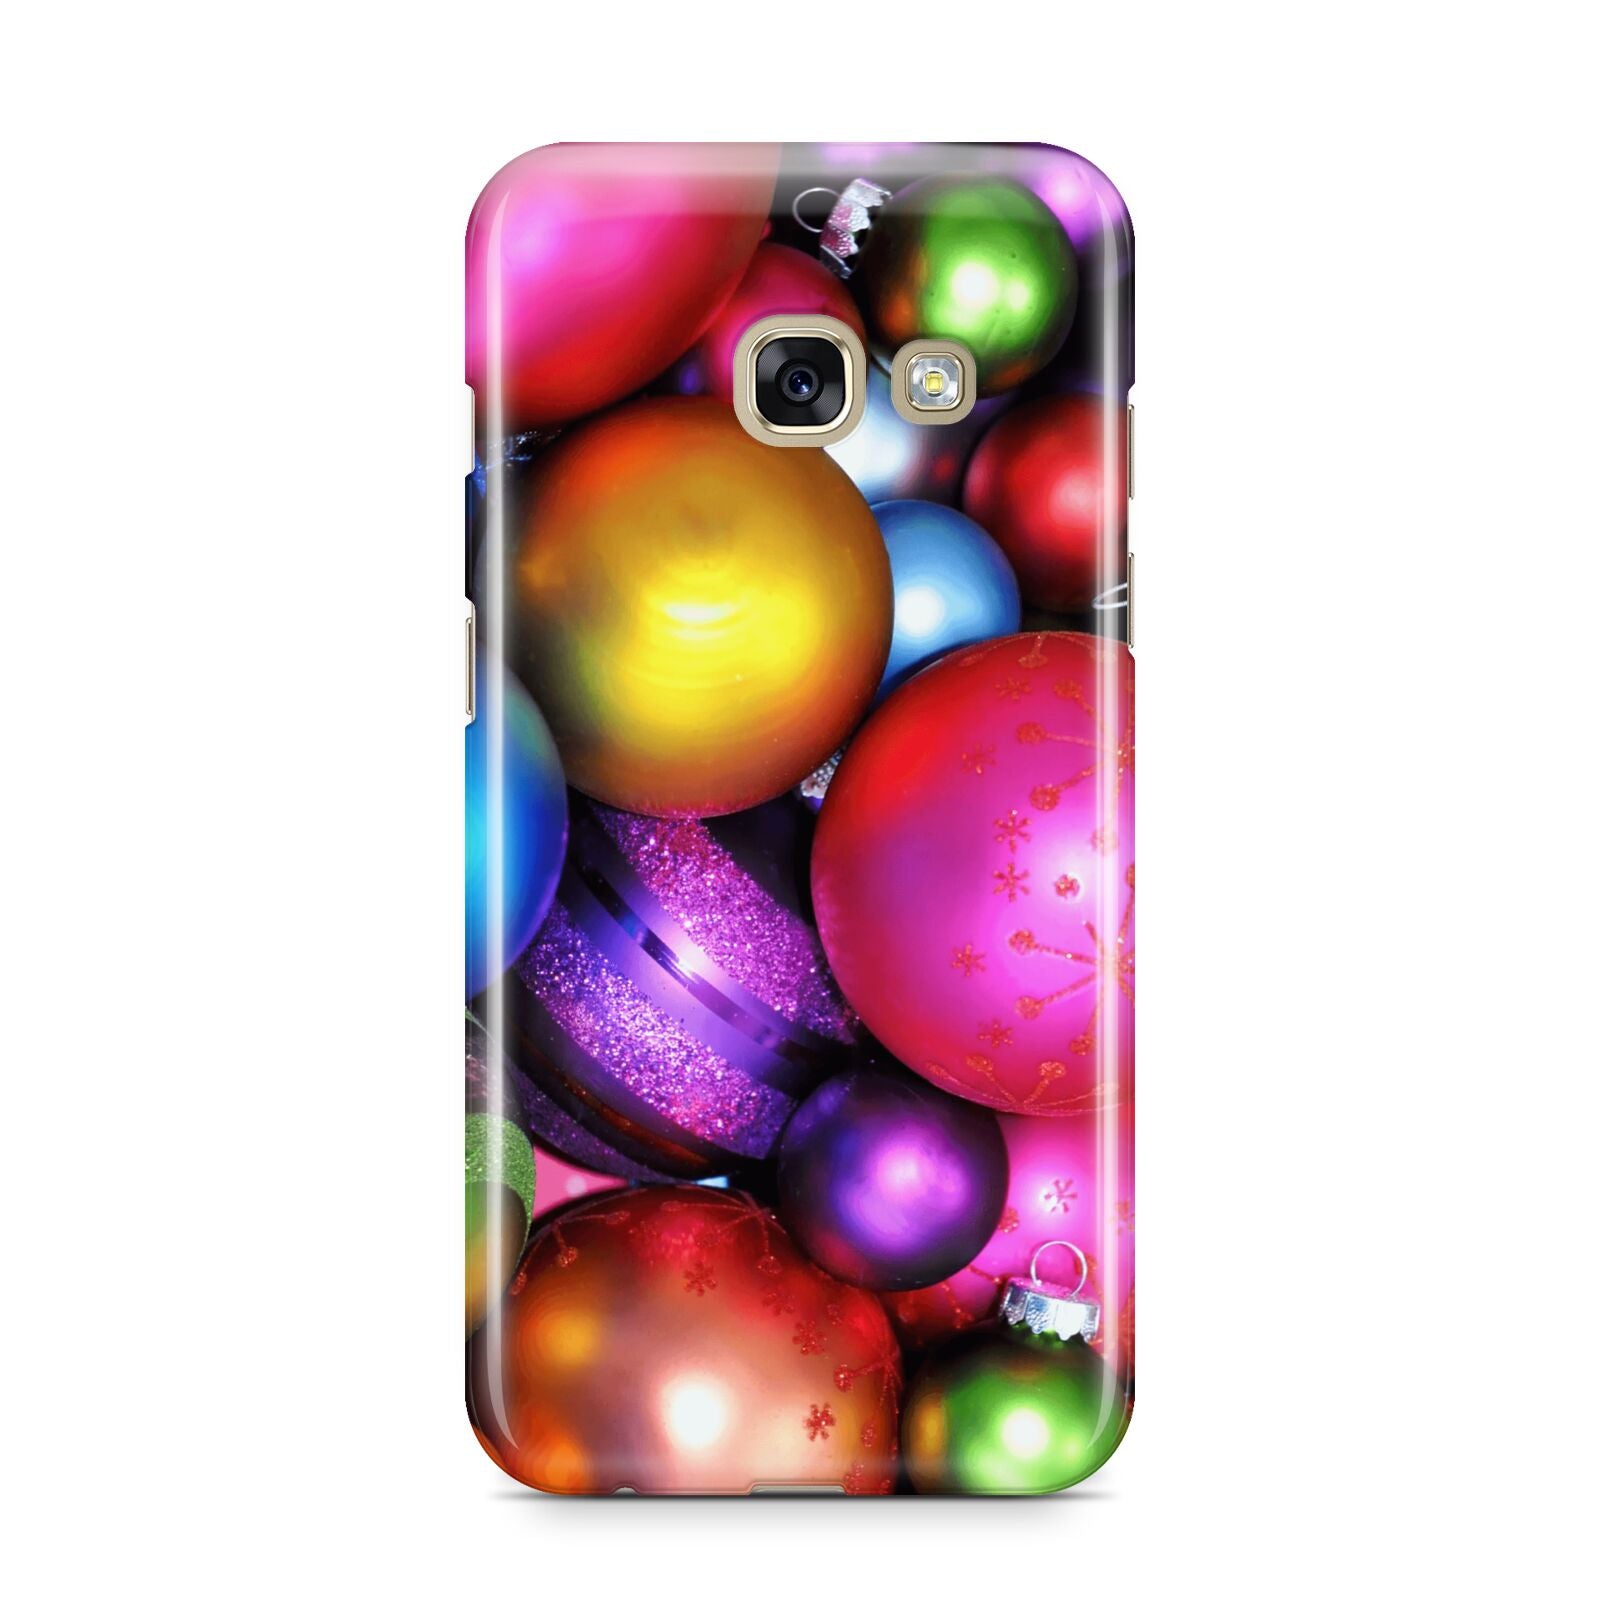 Bauble Samsung Galaxy A3 2017 Case on gold phone